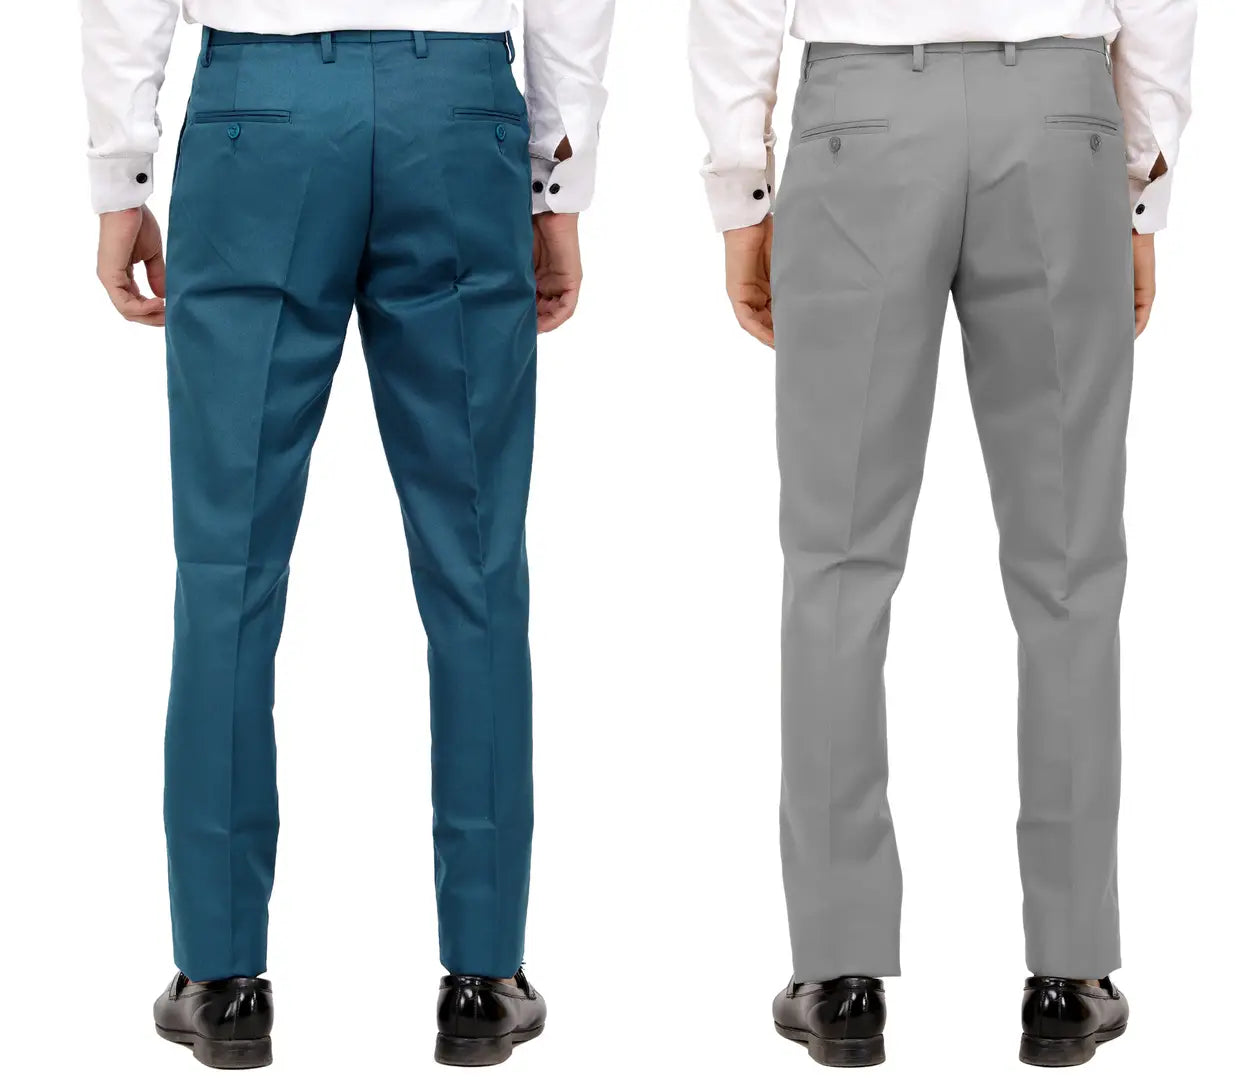 Kundan Men Poly-Viscose Blended Morpich Blue and Light Cot Grey Formal Trousers ( Pack of 2 Trousers )